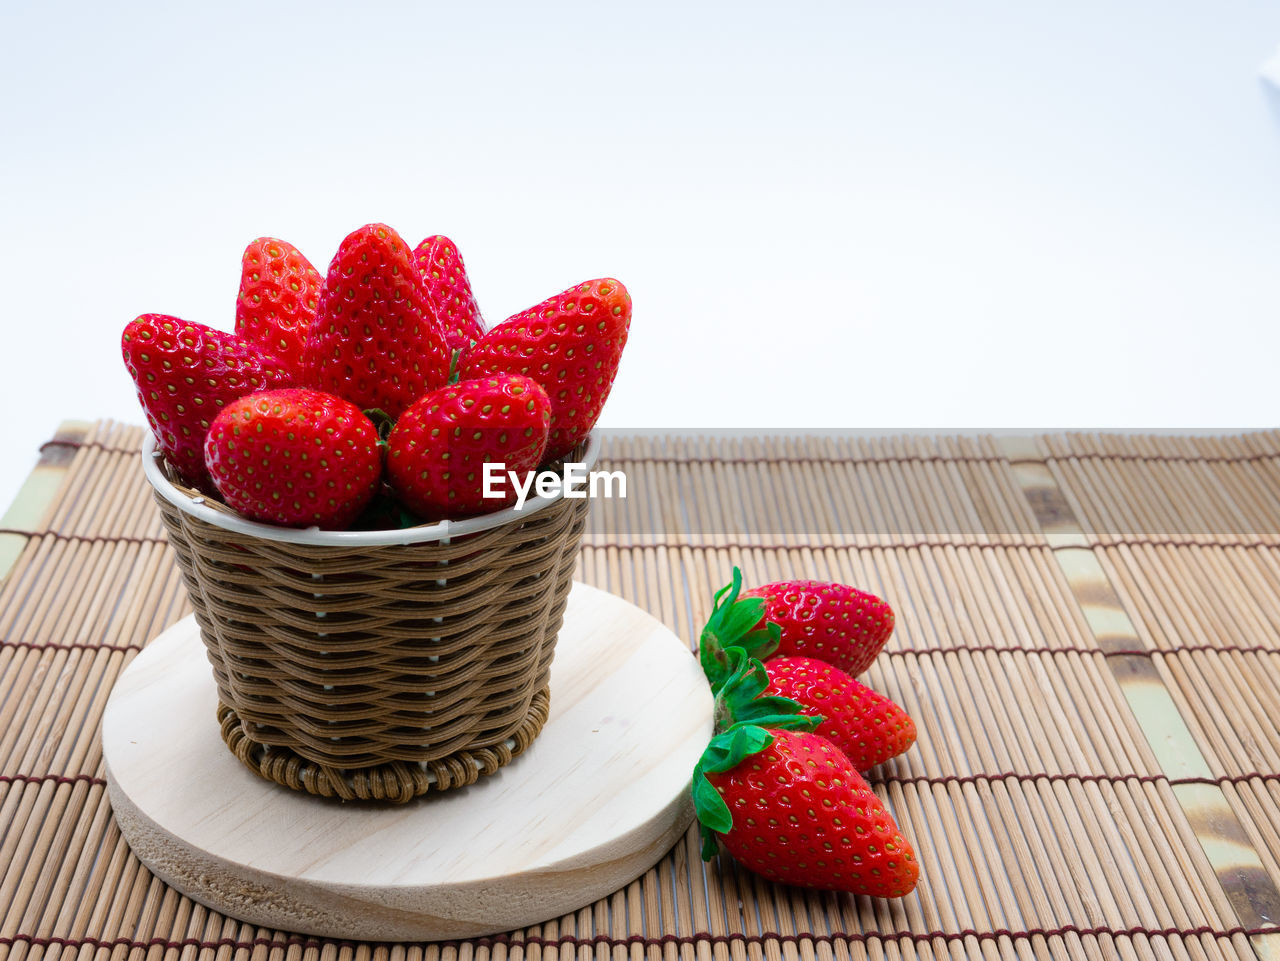 CLOSE-UP OF STRAWBERRIES ON TABLE